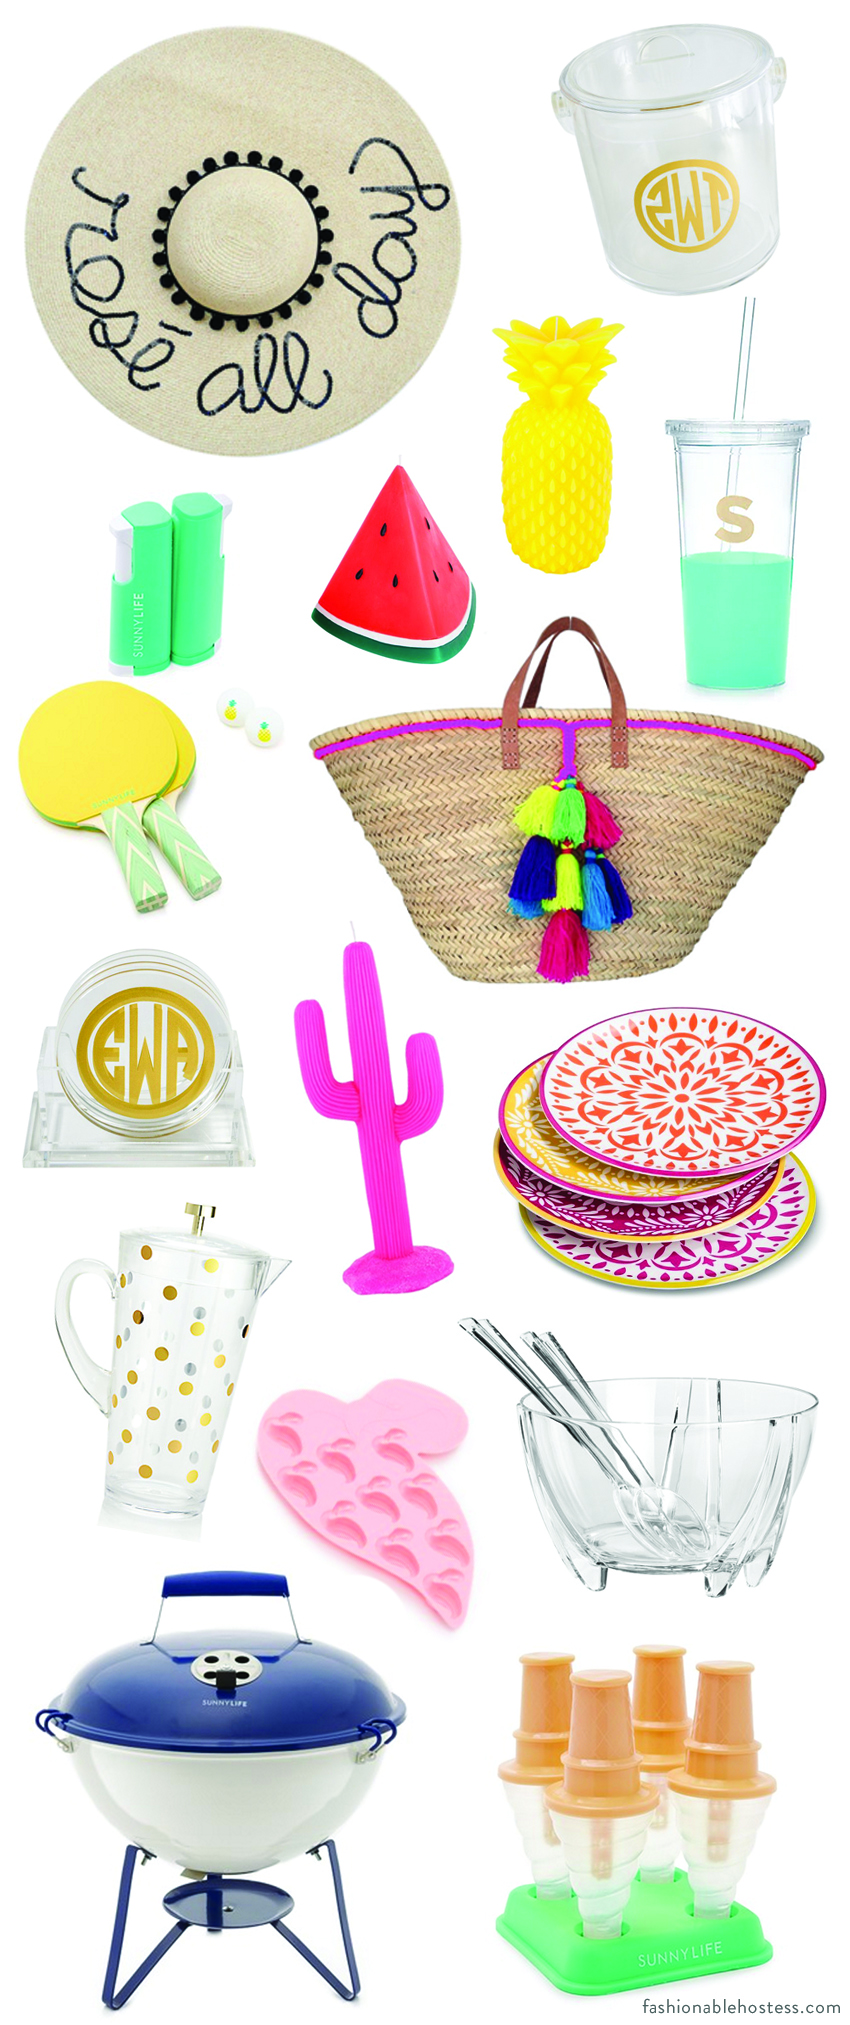 summeressentials for your pool party on fashionable hostess